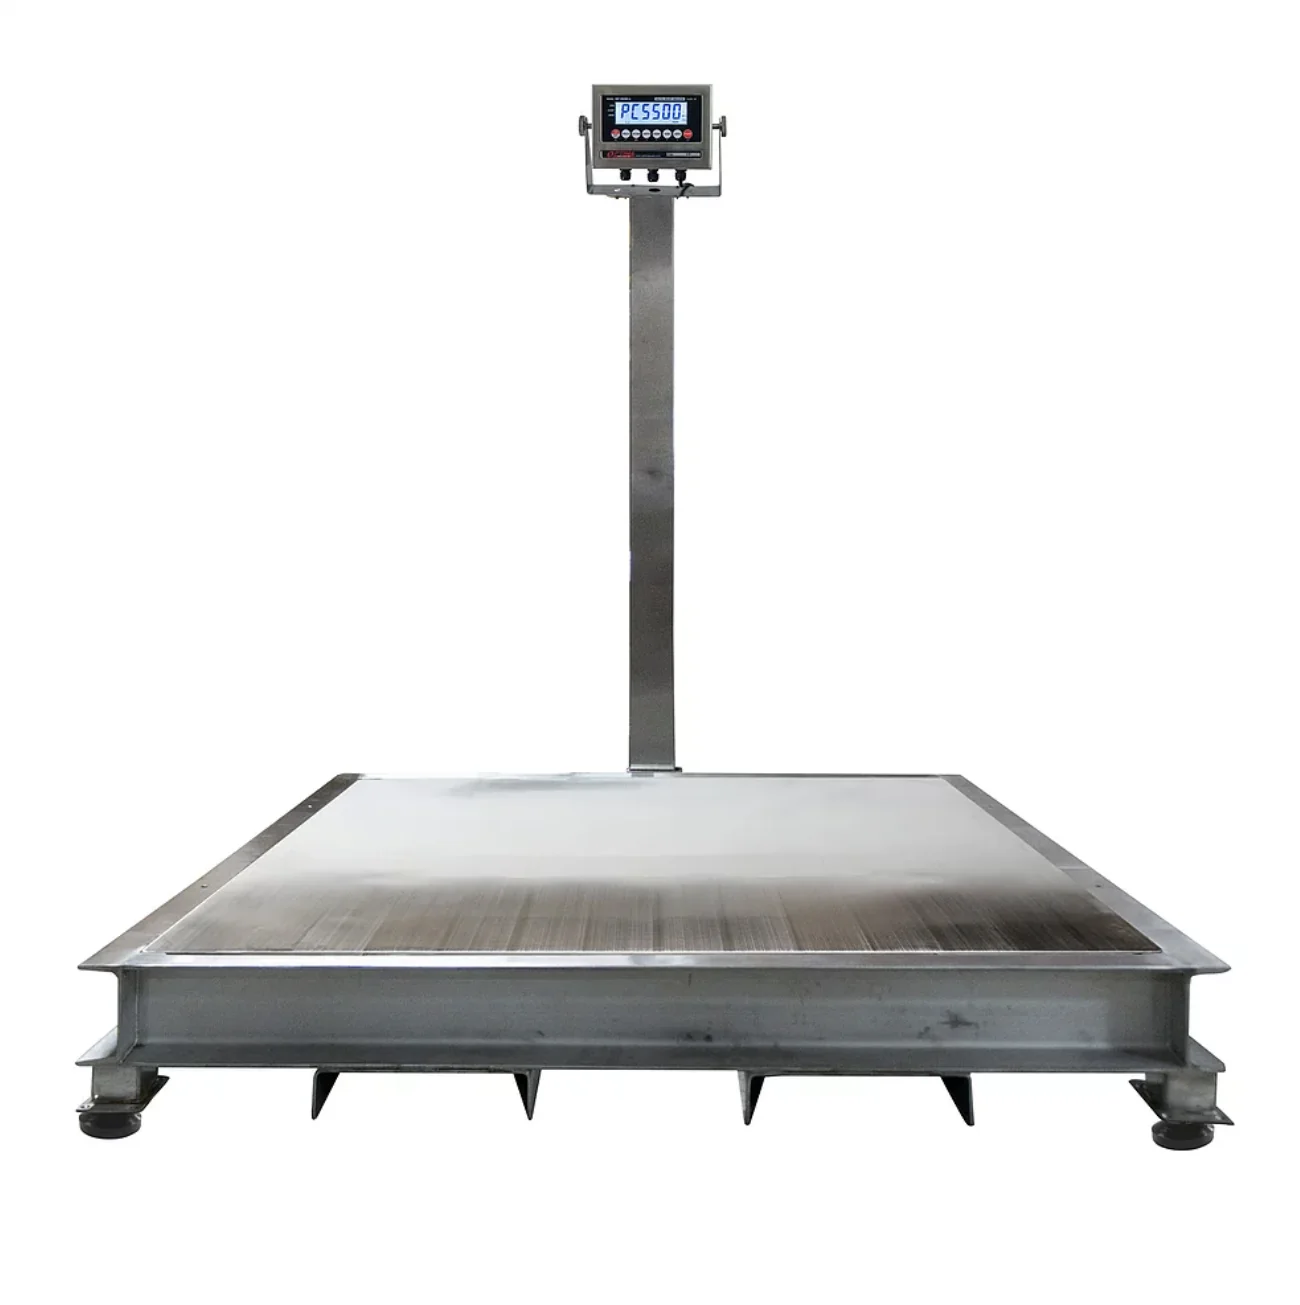 5'x5' Heavy Duty Floor Scale NTEP Approved - Prime USA Scales